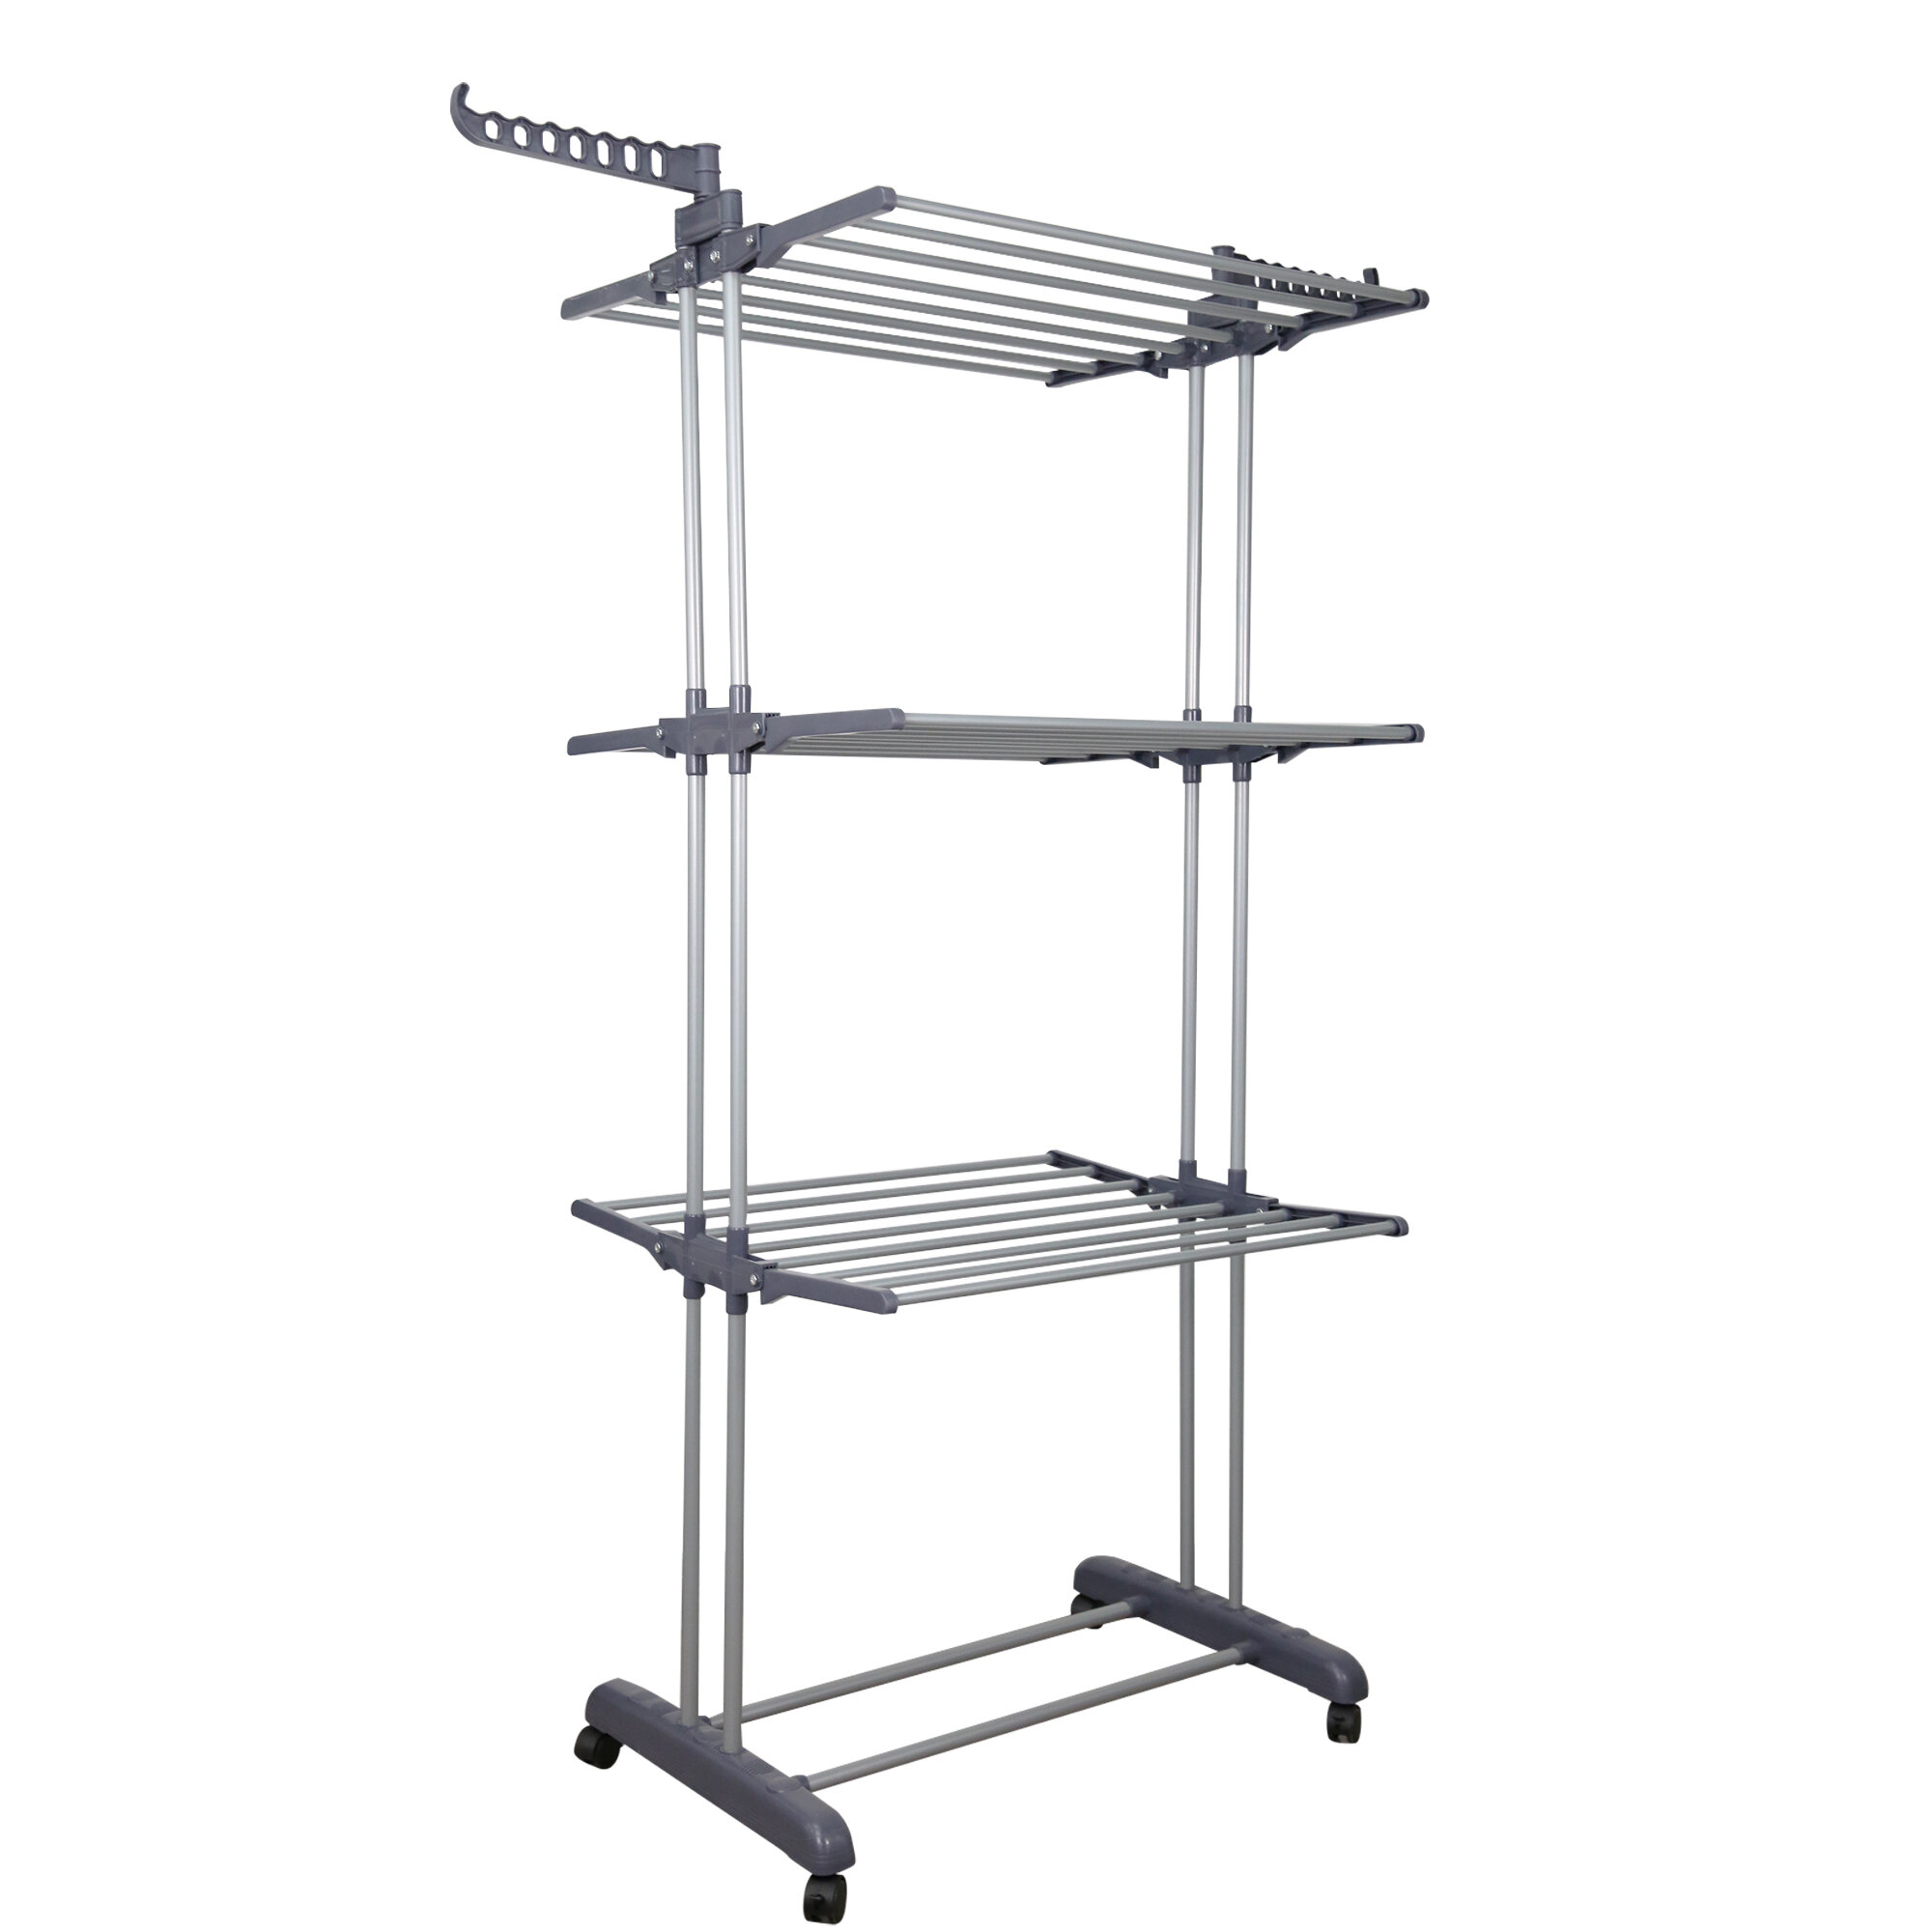 Rebrilliant Clothes Clothes Drying Rack, 3-Tier Collapsible, Rolling ...